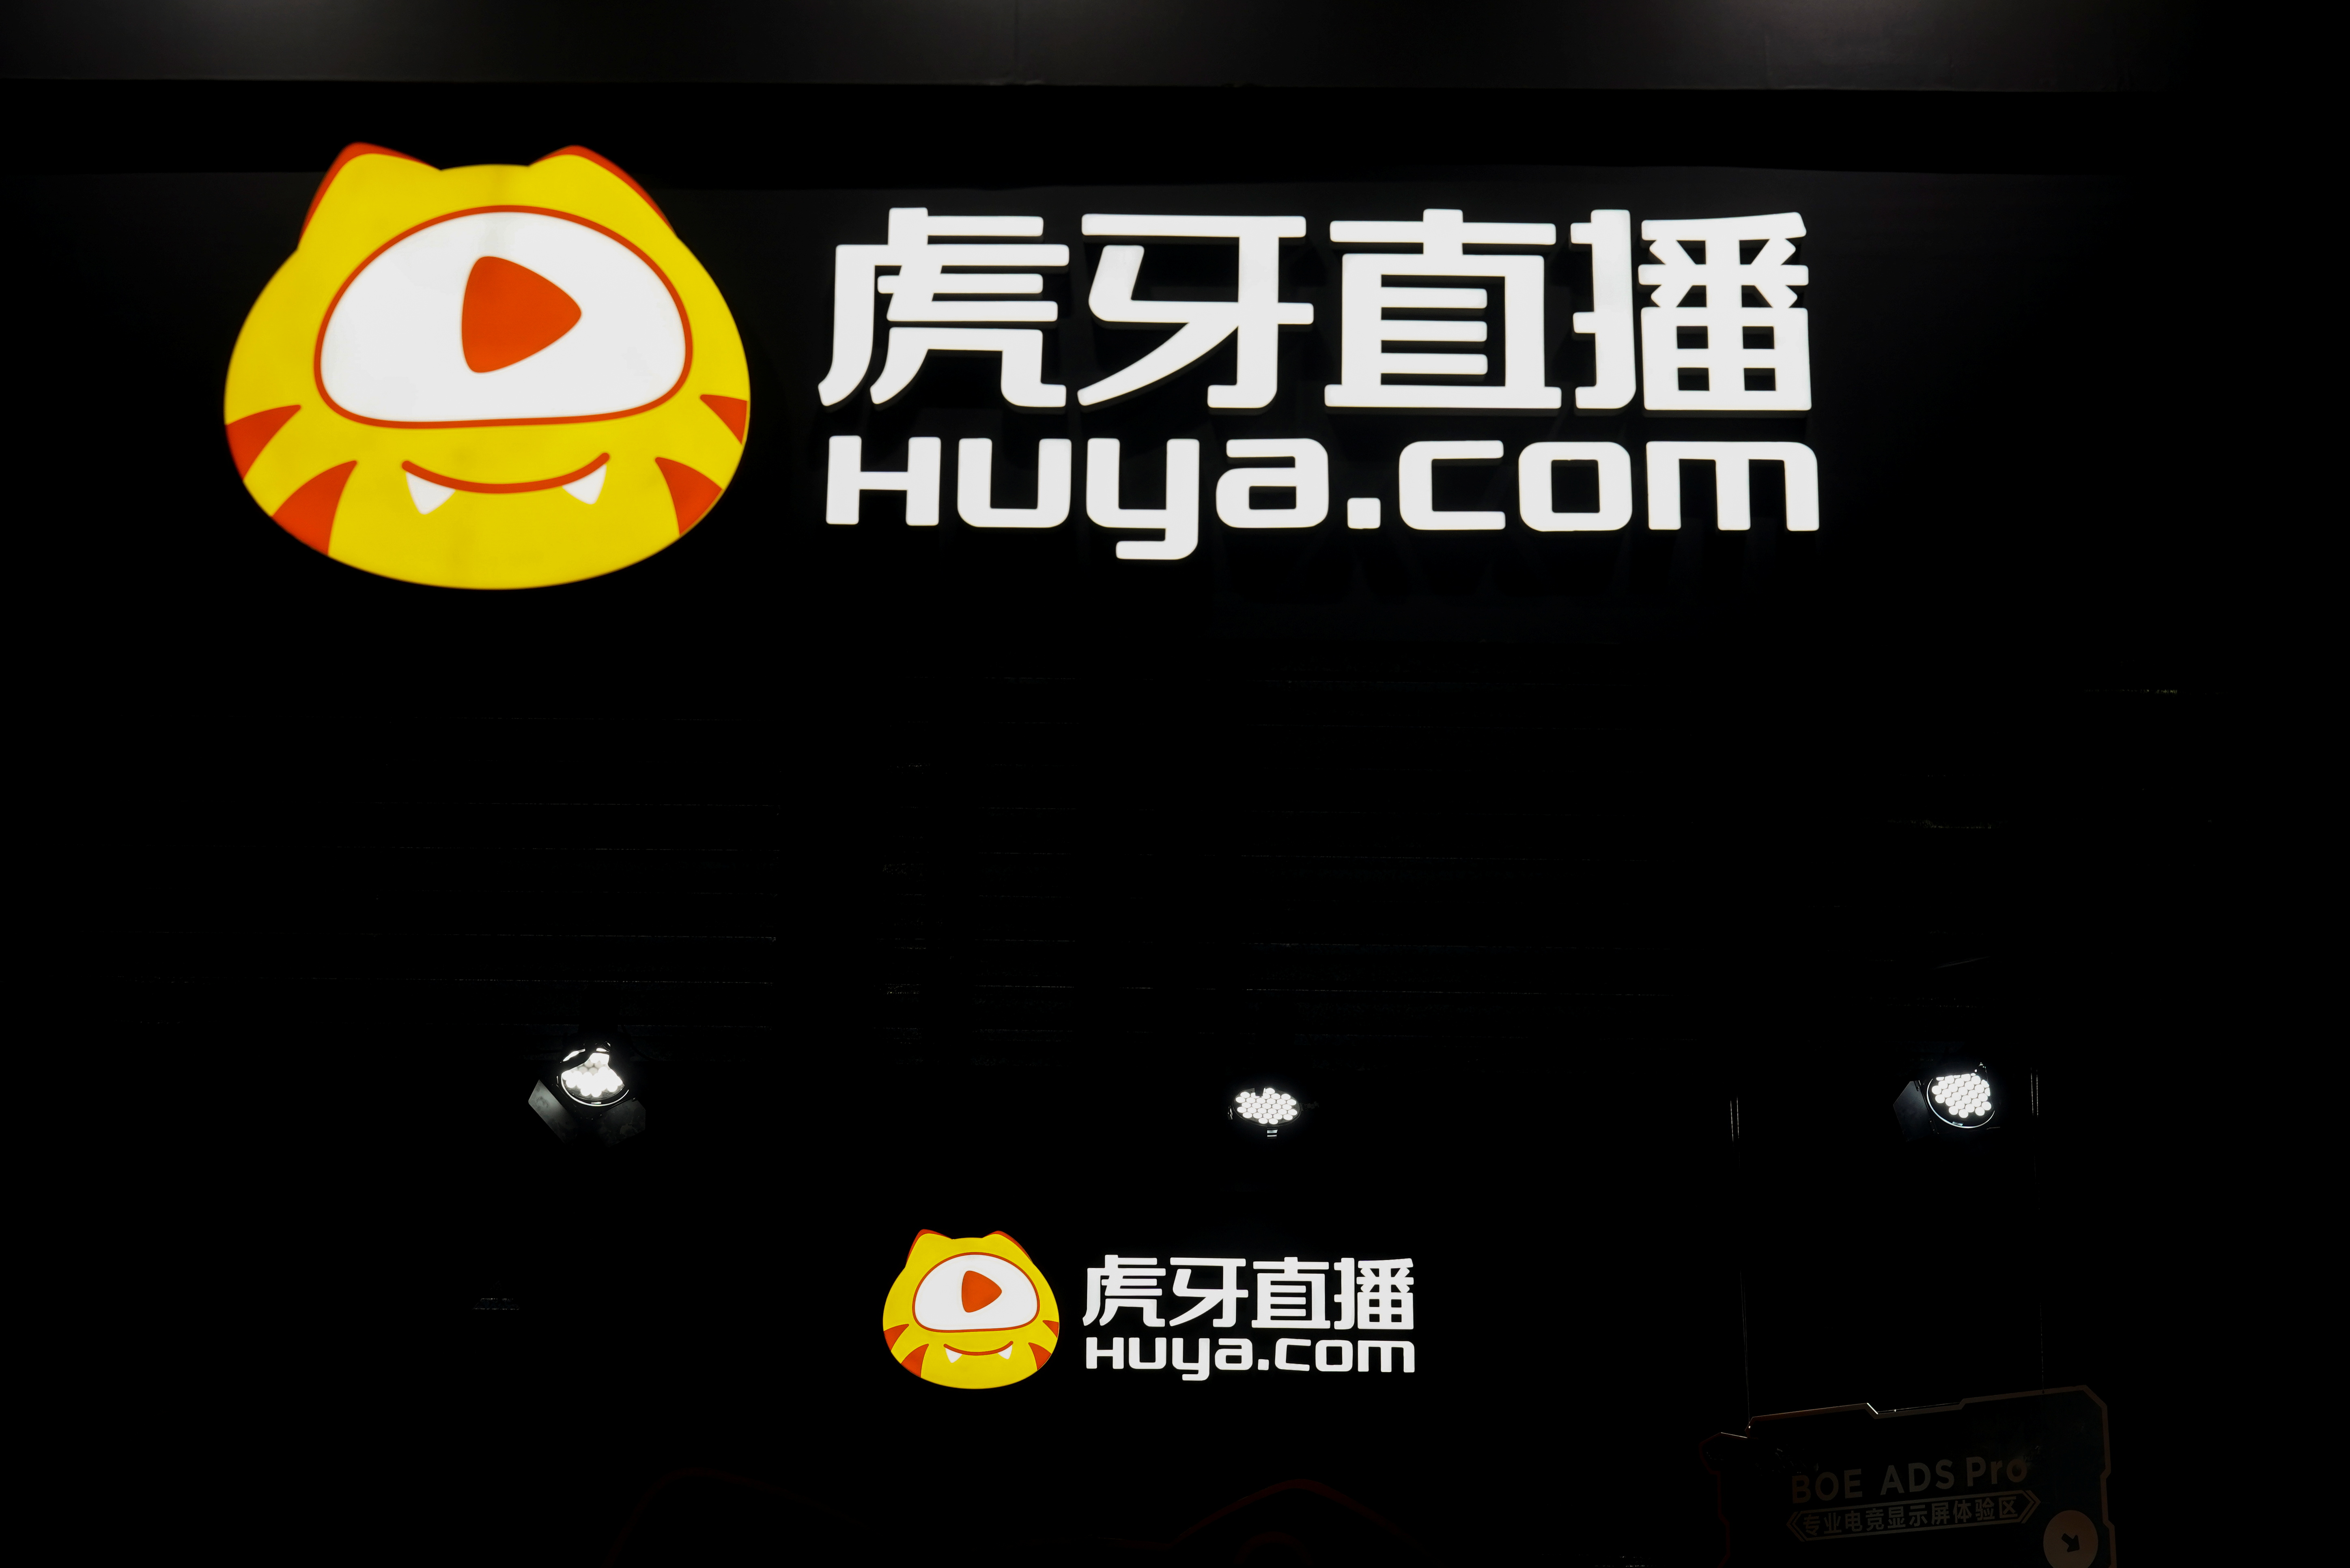 Signs of video game streaming site Huya are seen at the China Digital Entertainment Expo and Conference, also known as ChinaJoy, in Shanghai